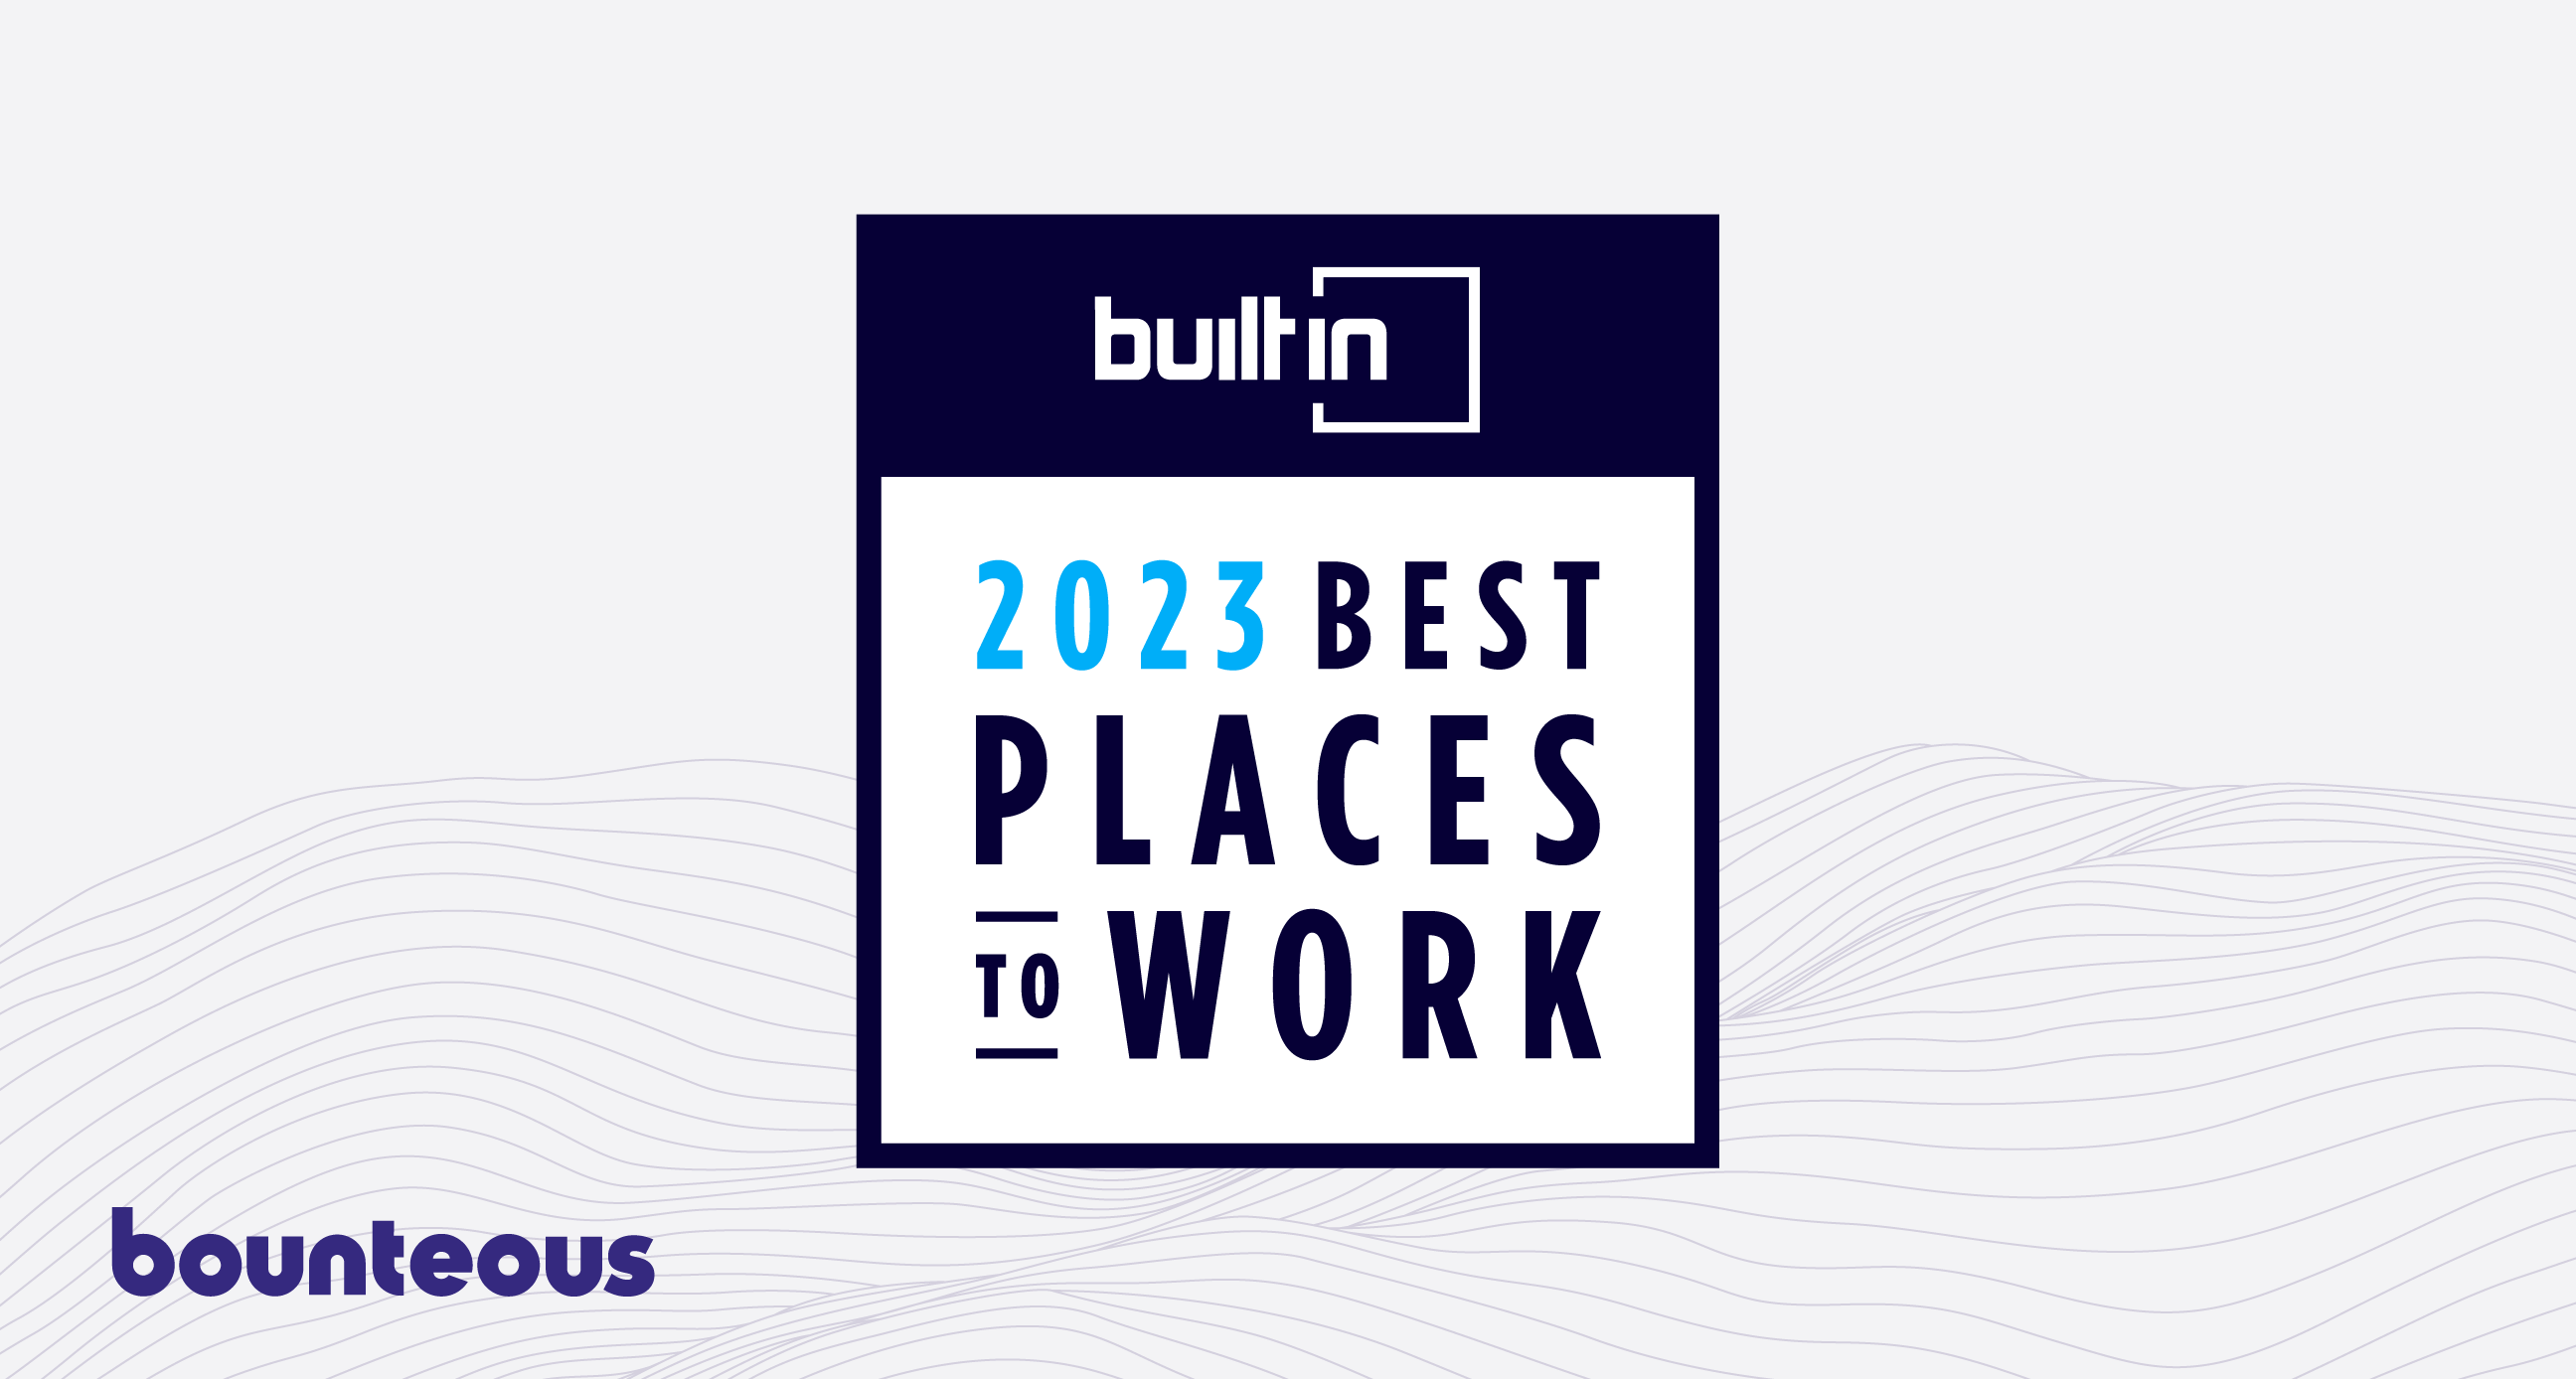 Press Release: Built In Honors Bounteous in 2023 Best Hybrid Places To Work Awards